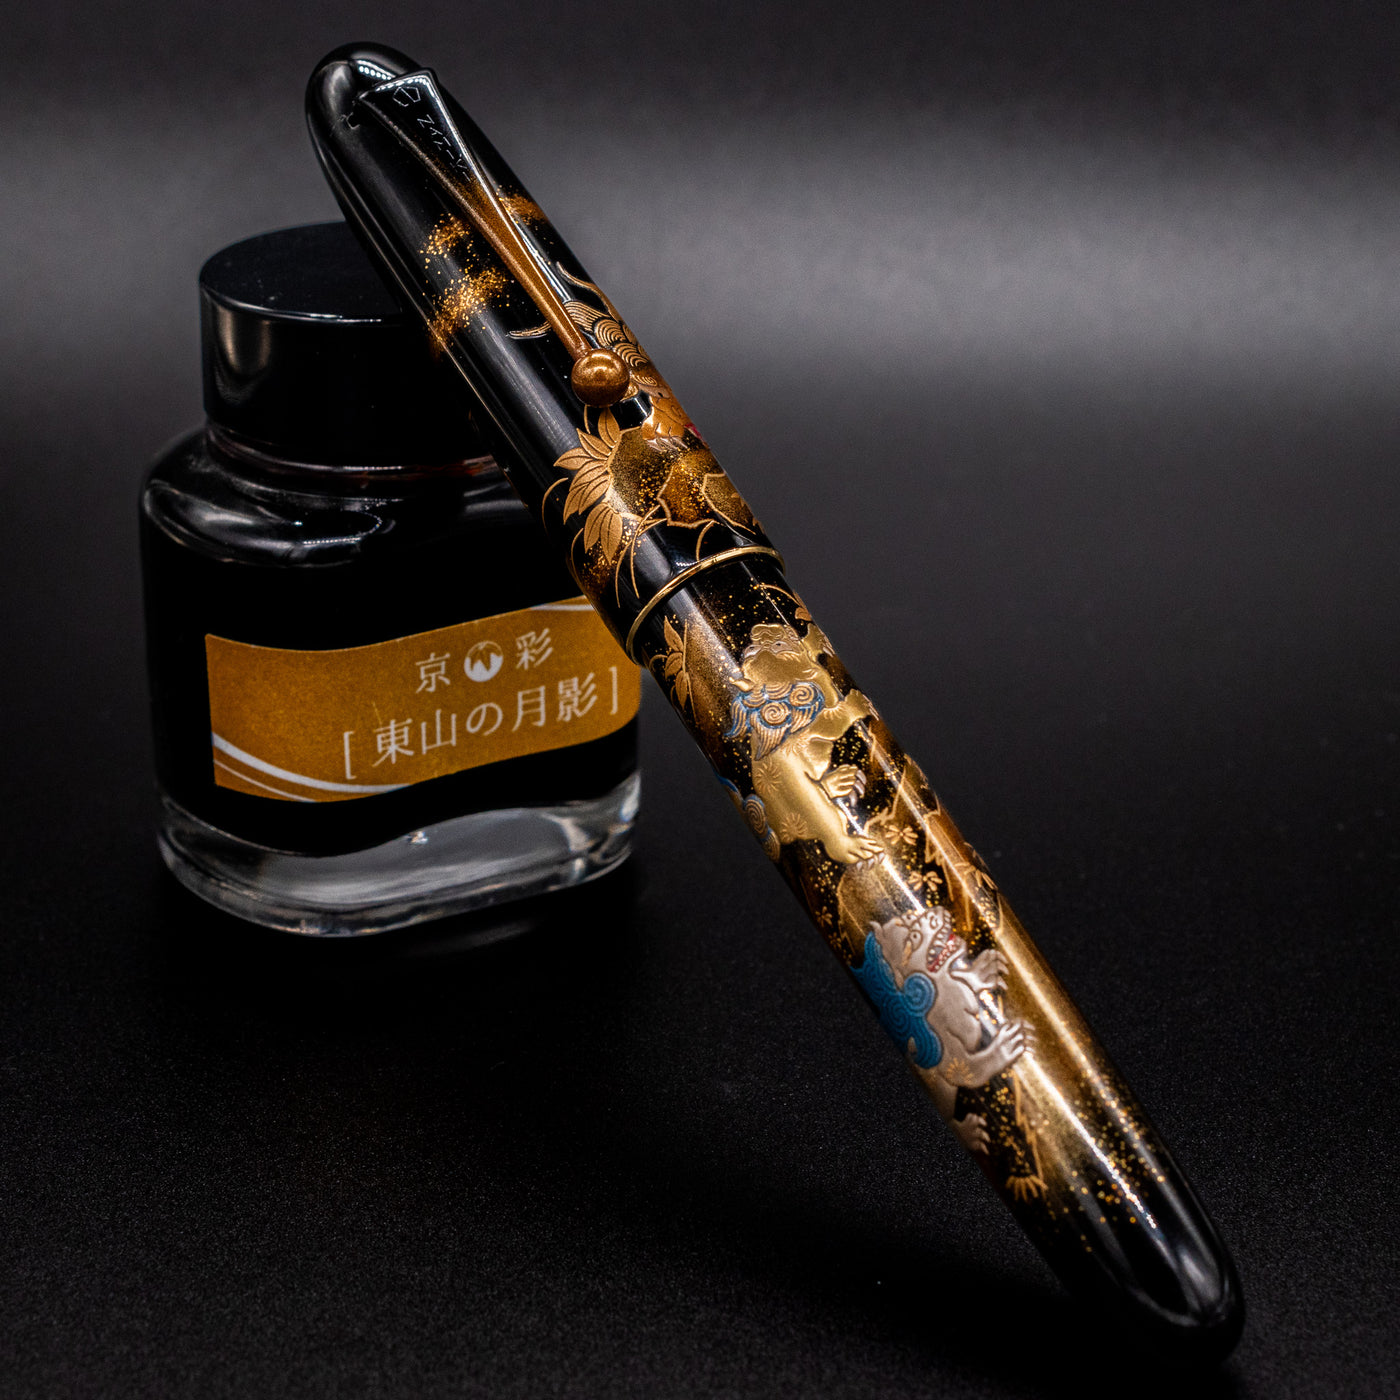 Namiki Yukari Royale Lioness and Cubs Fountain Pen capped